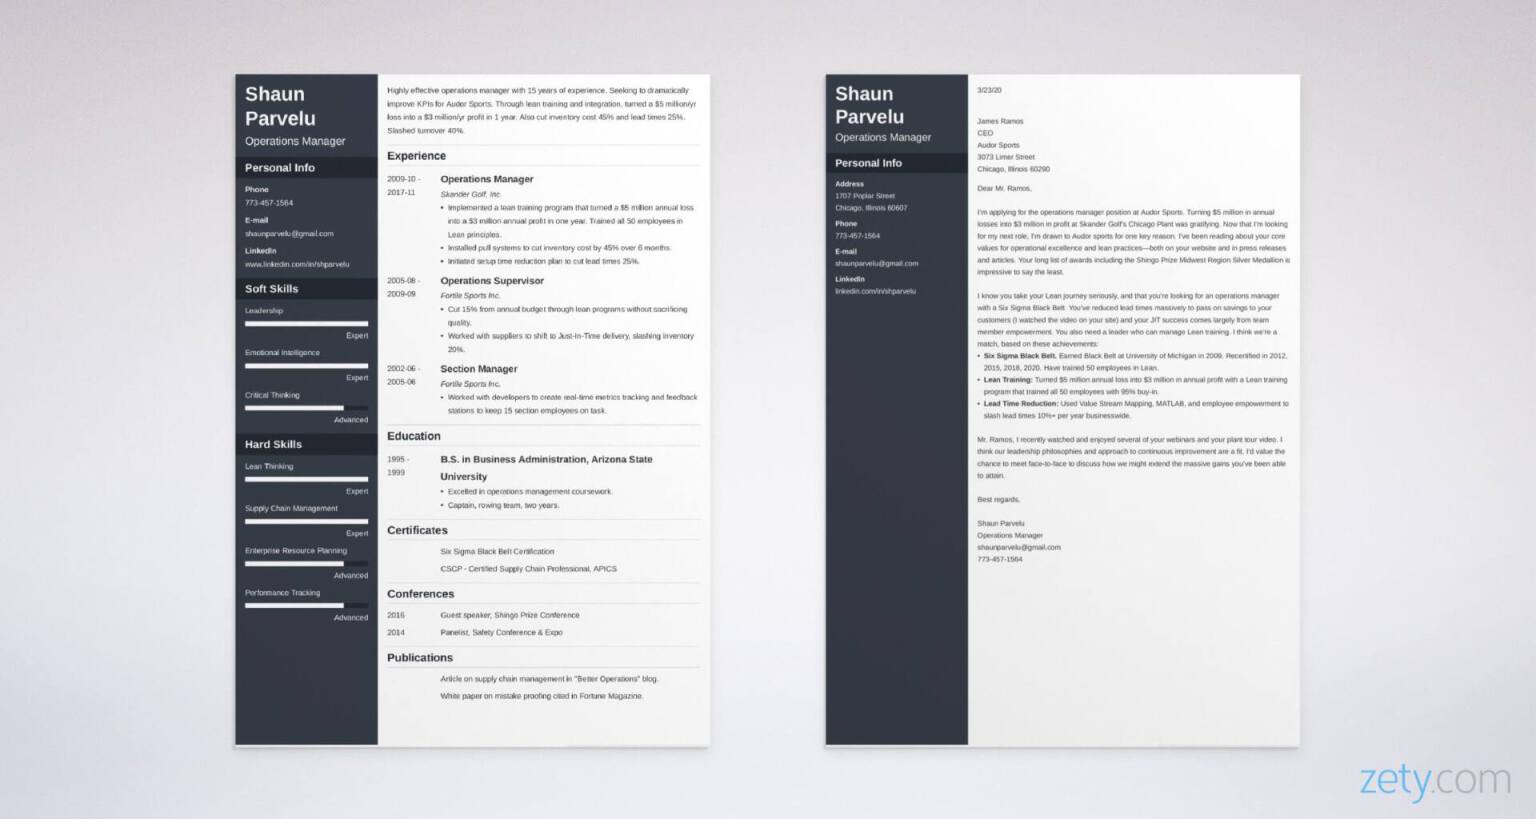 operations manager resume and cover letter set